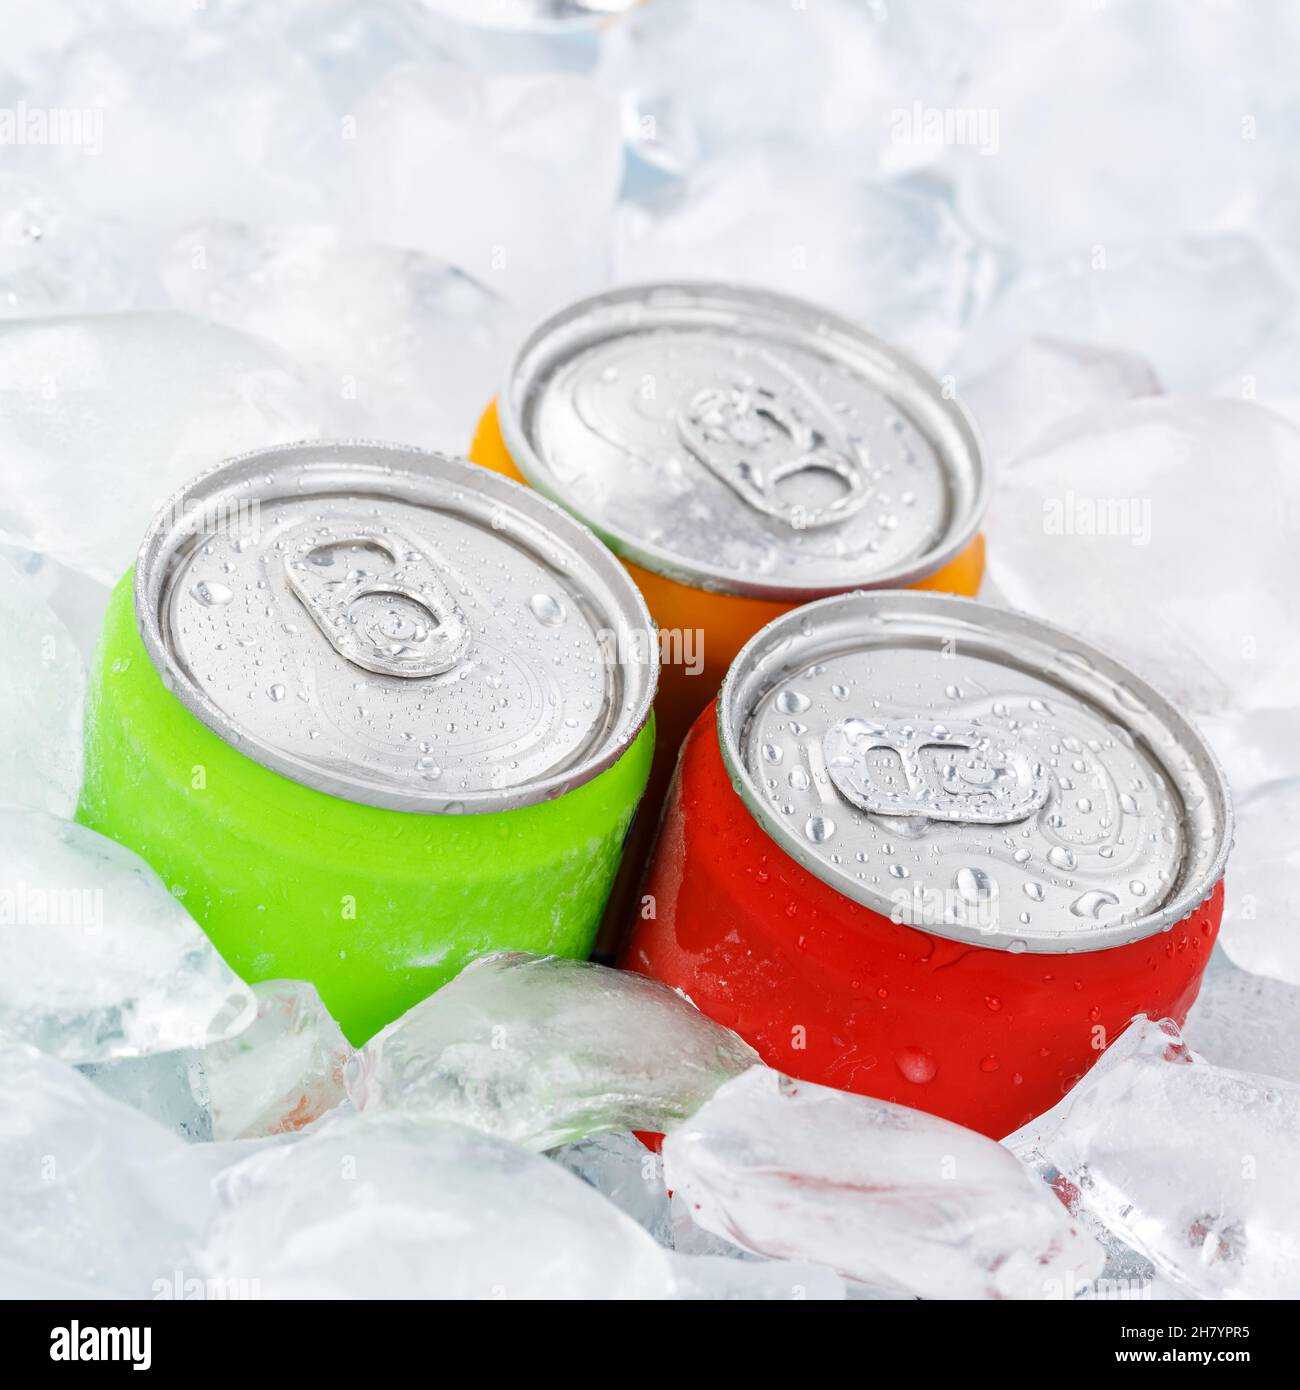 Drinks lemonade cola drink softdrinks in cans with ice cubes square soda Stock Photo